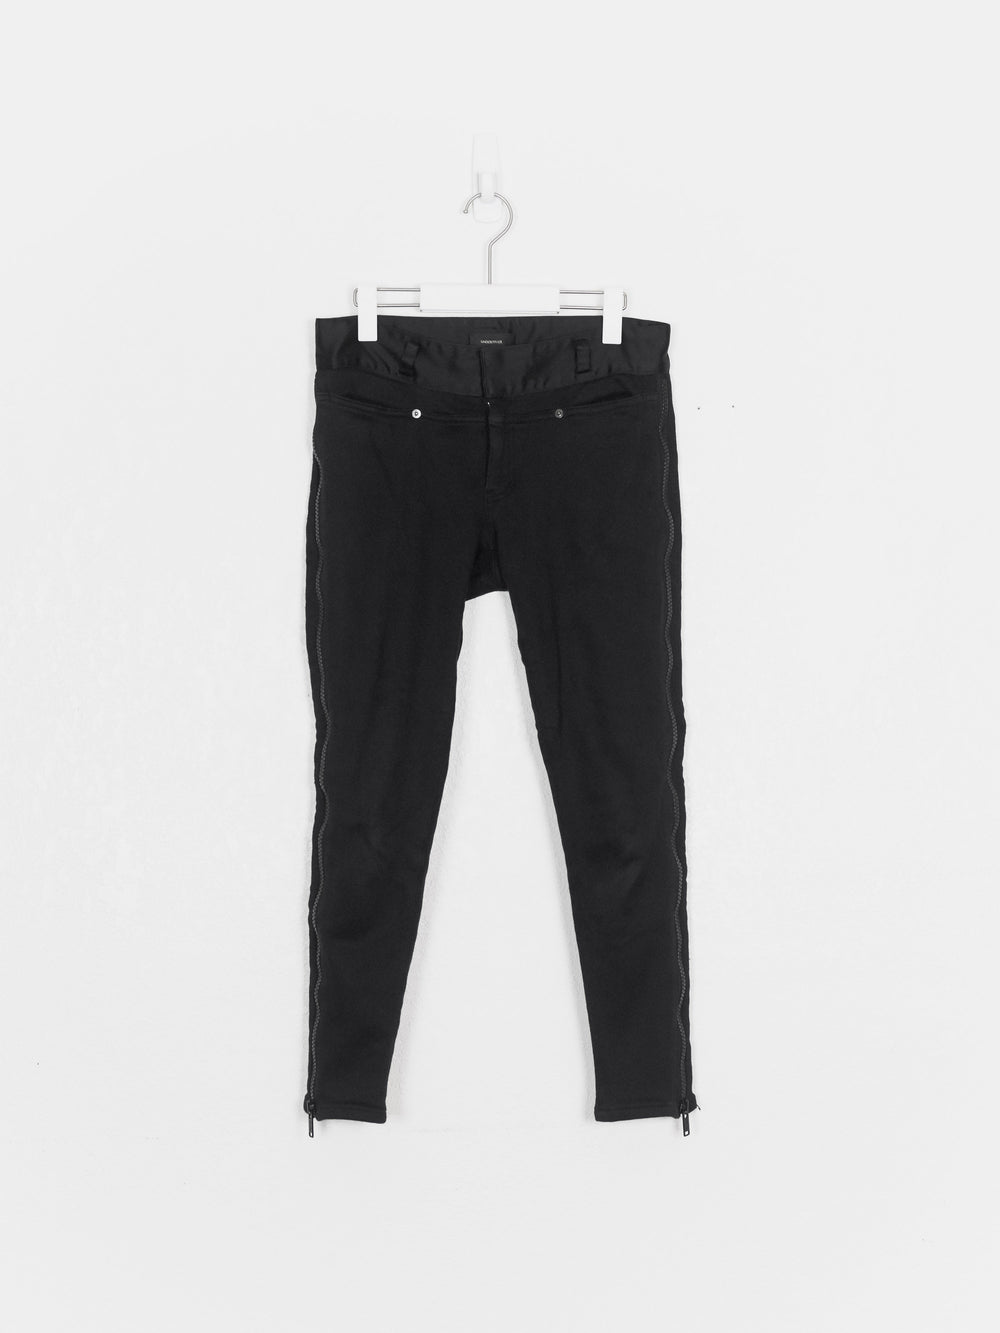 Undercover SS14 Side Zip Trousers